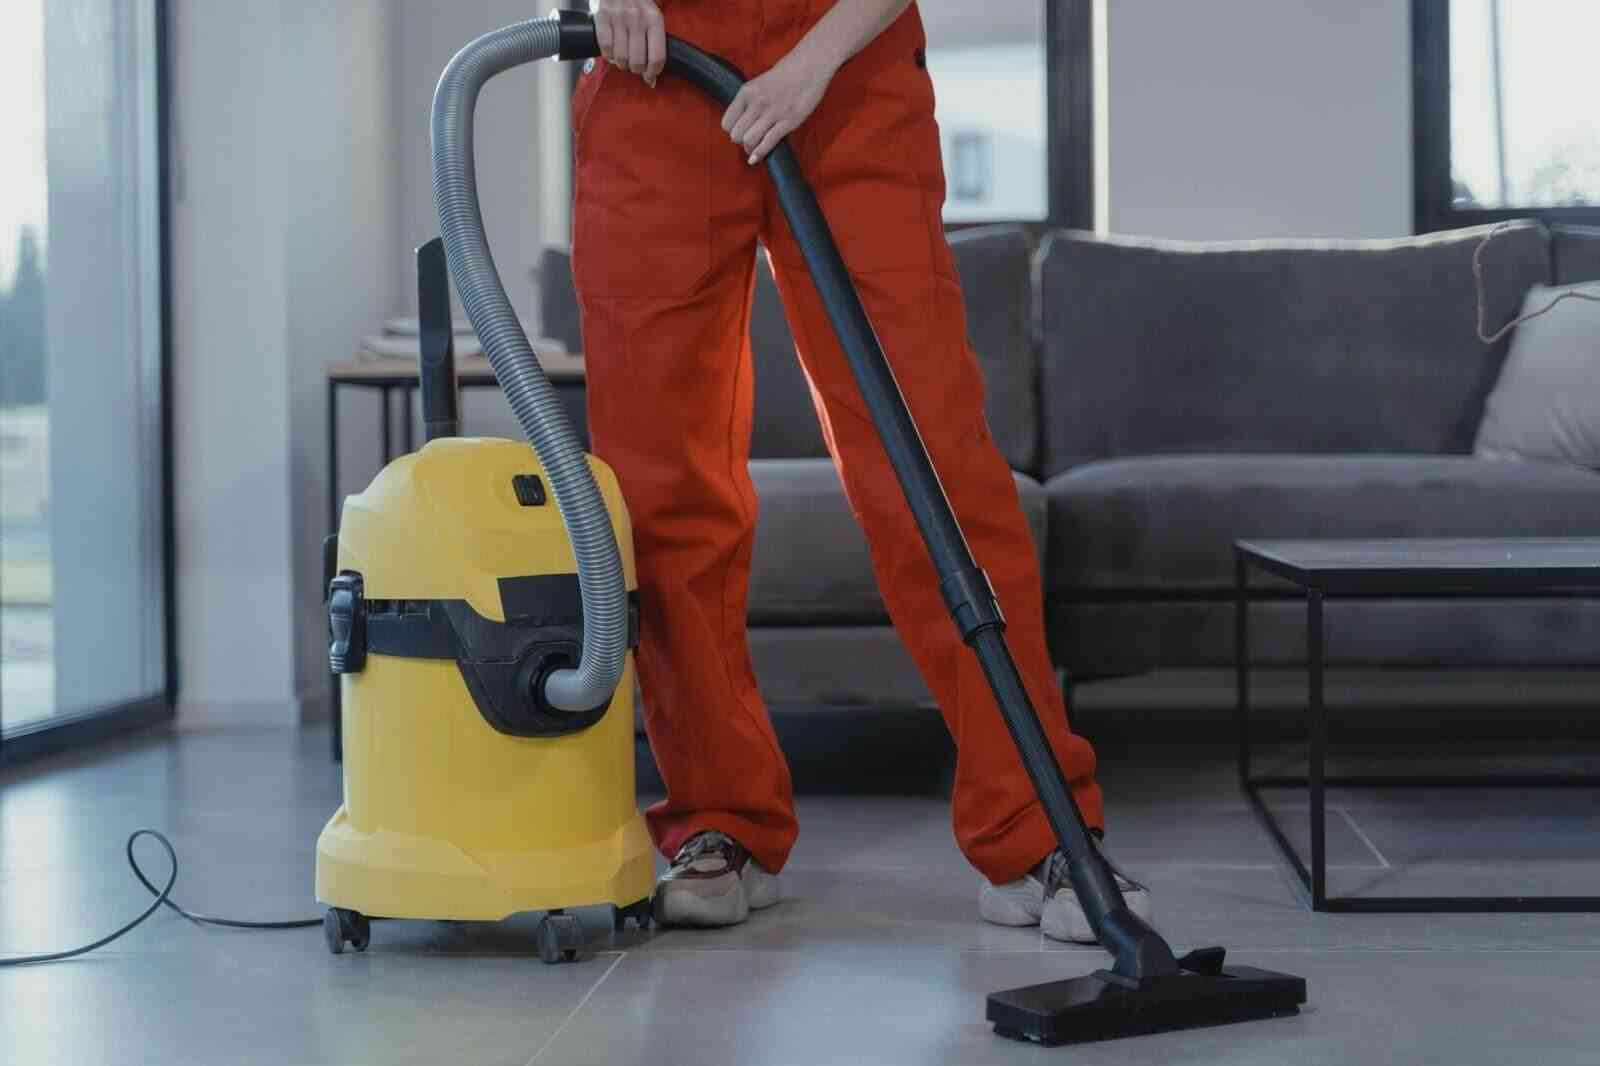 The cleaner the home is, the better your life becomes